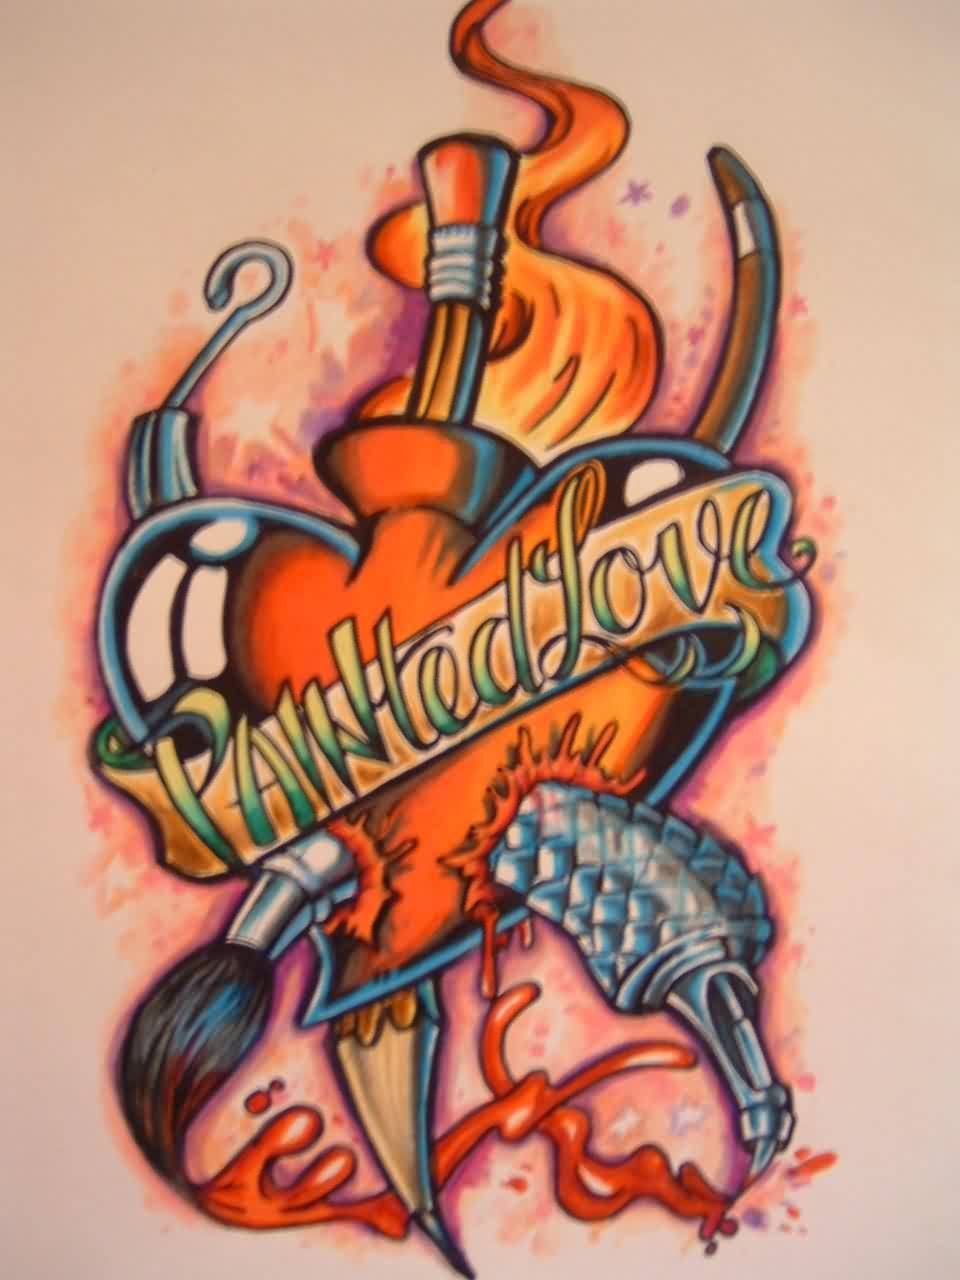 Paintbrush And Pencil In Heart Tattoo Design